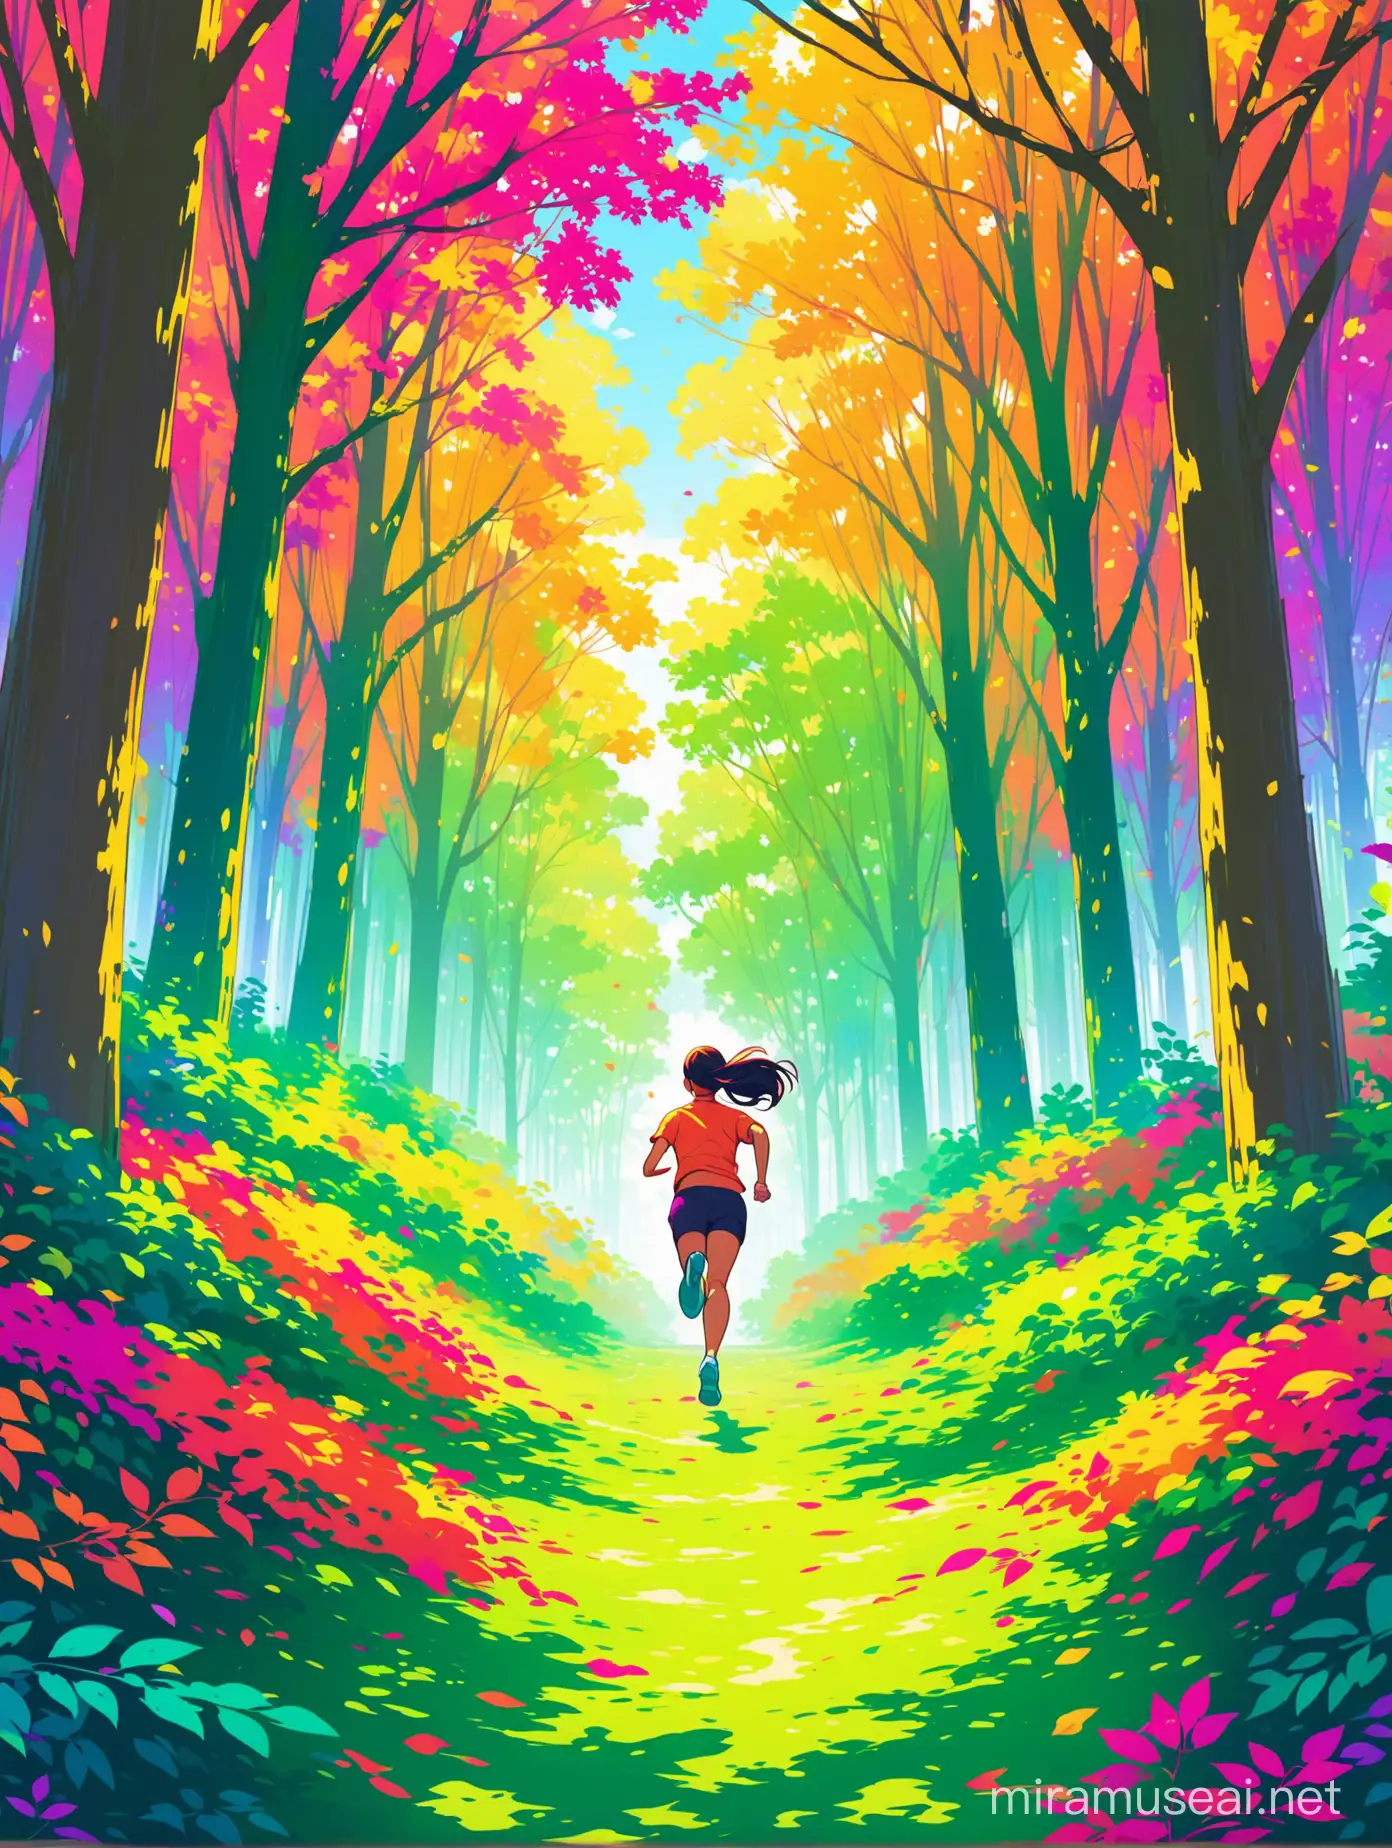 Sprinting Through Enchanting Woodlands Energetic Runner Amidst Vibrant Foliage